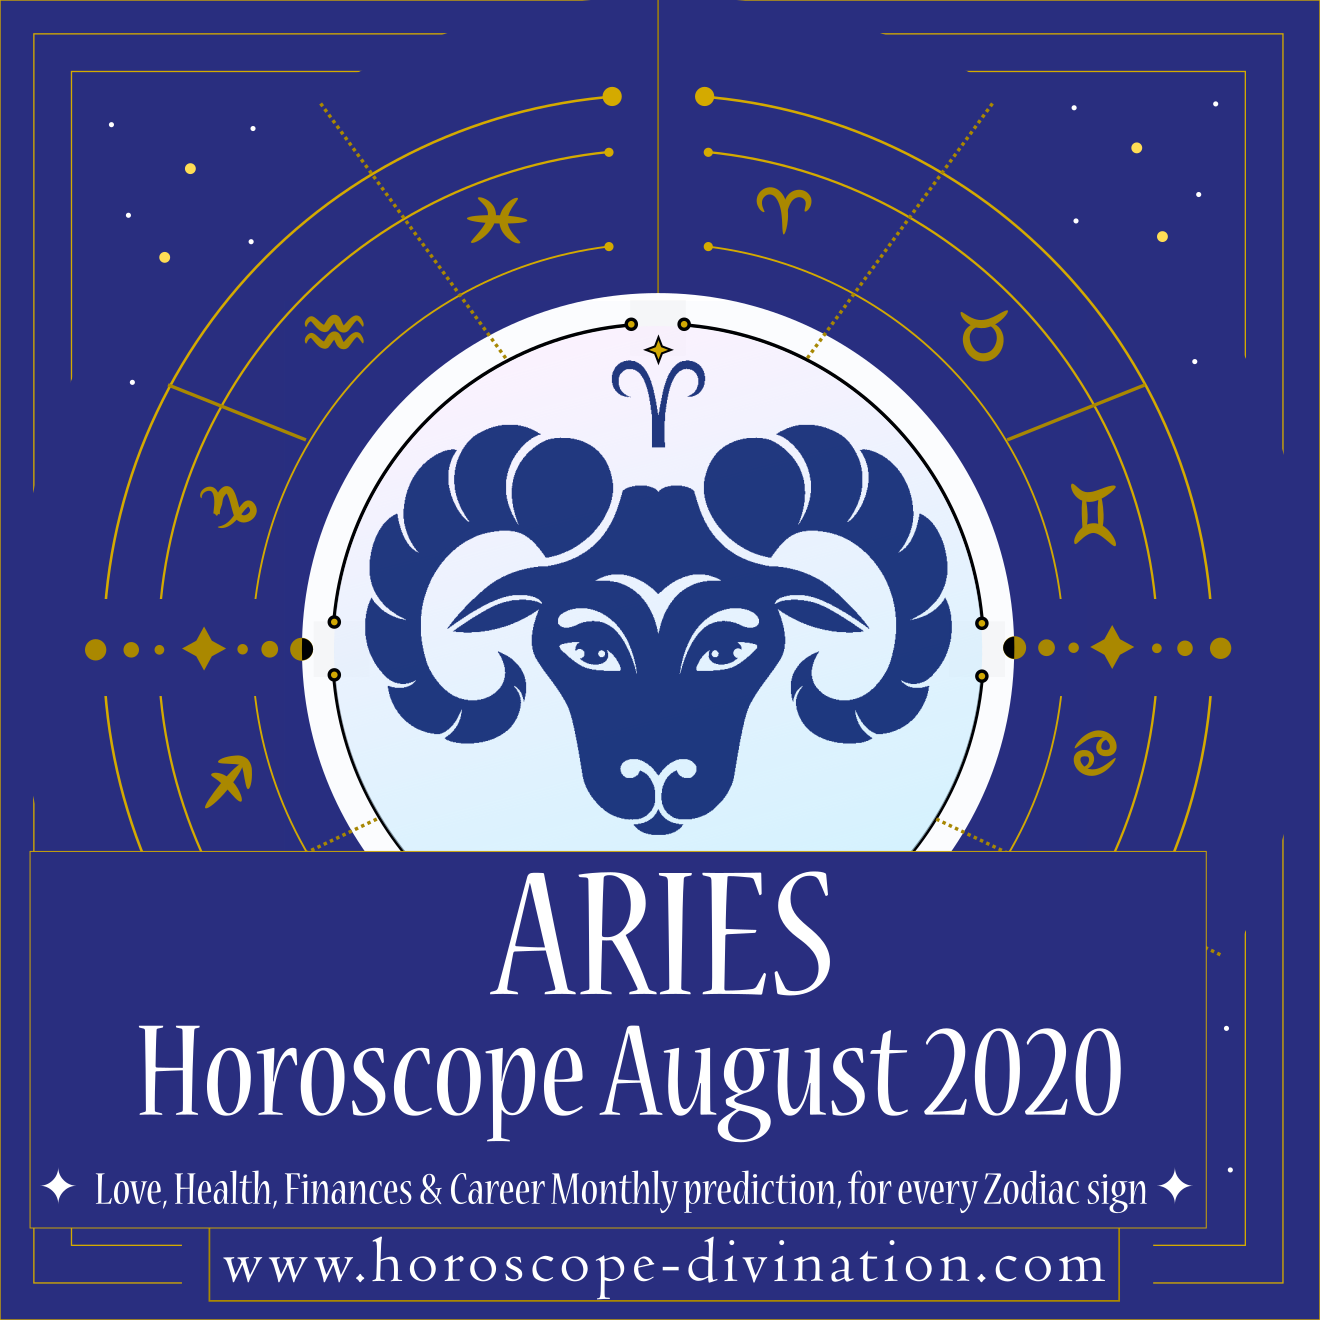 What is the zodiac sign of August 28 2020?